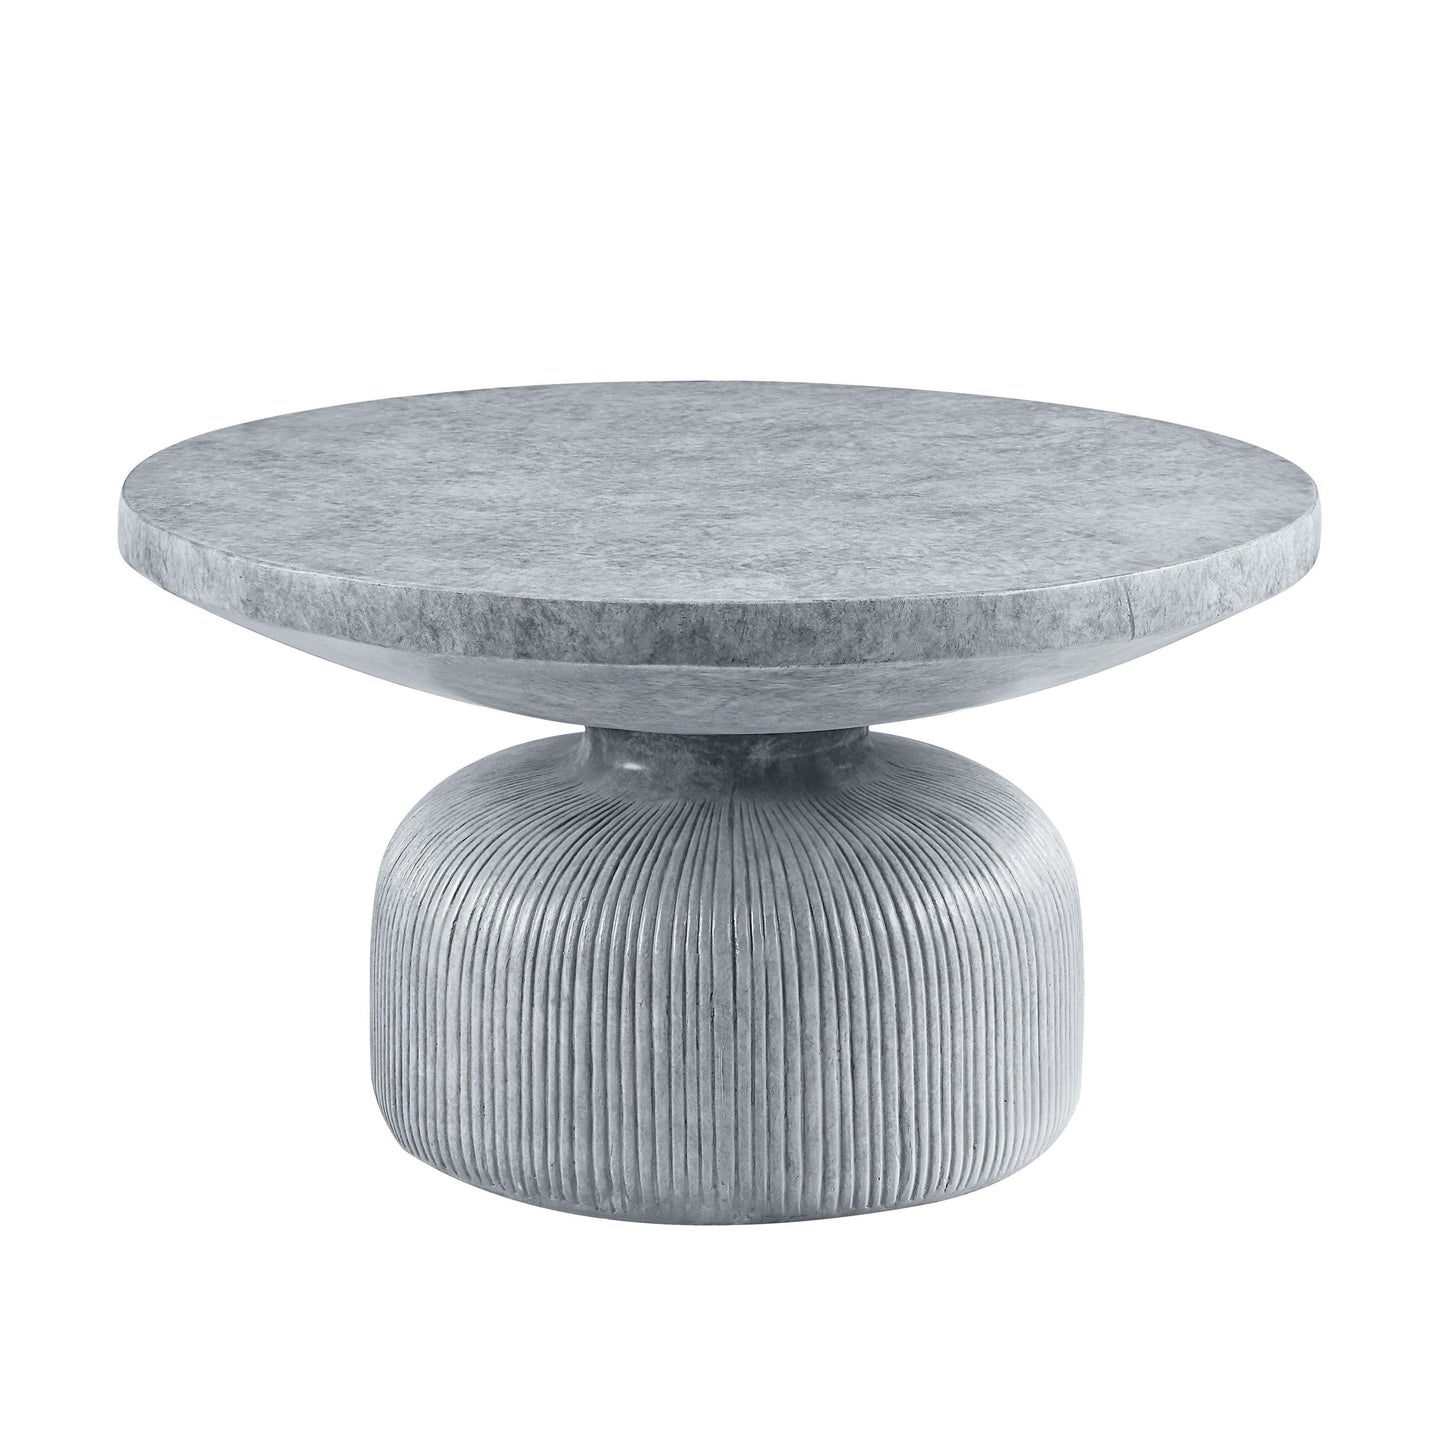 ACME Laddie Coffee Table, Weathered Gray Finish LV01926 - Enova Luxe Home Store